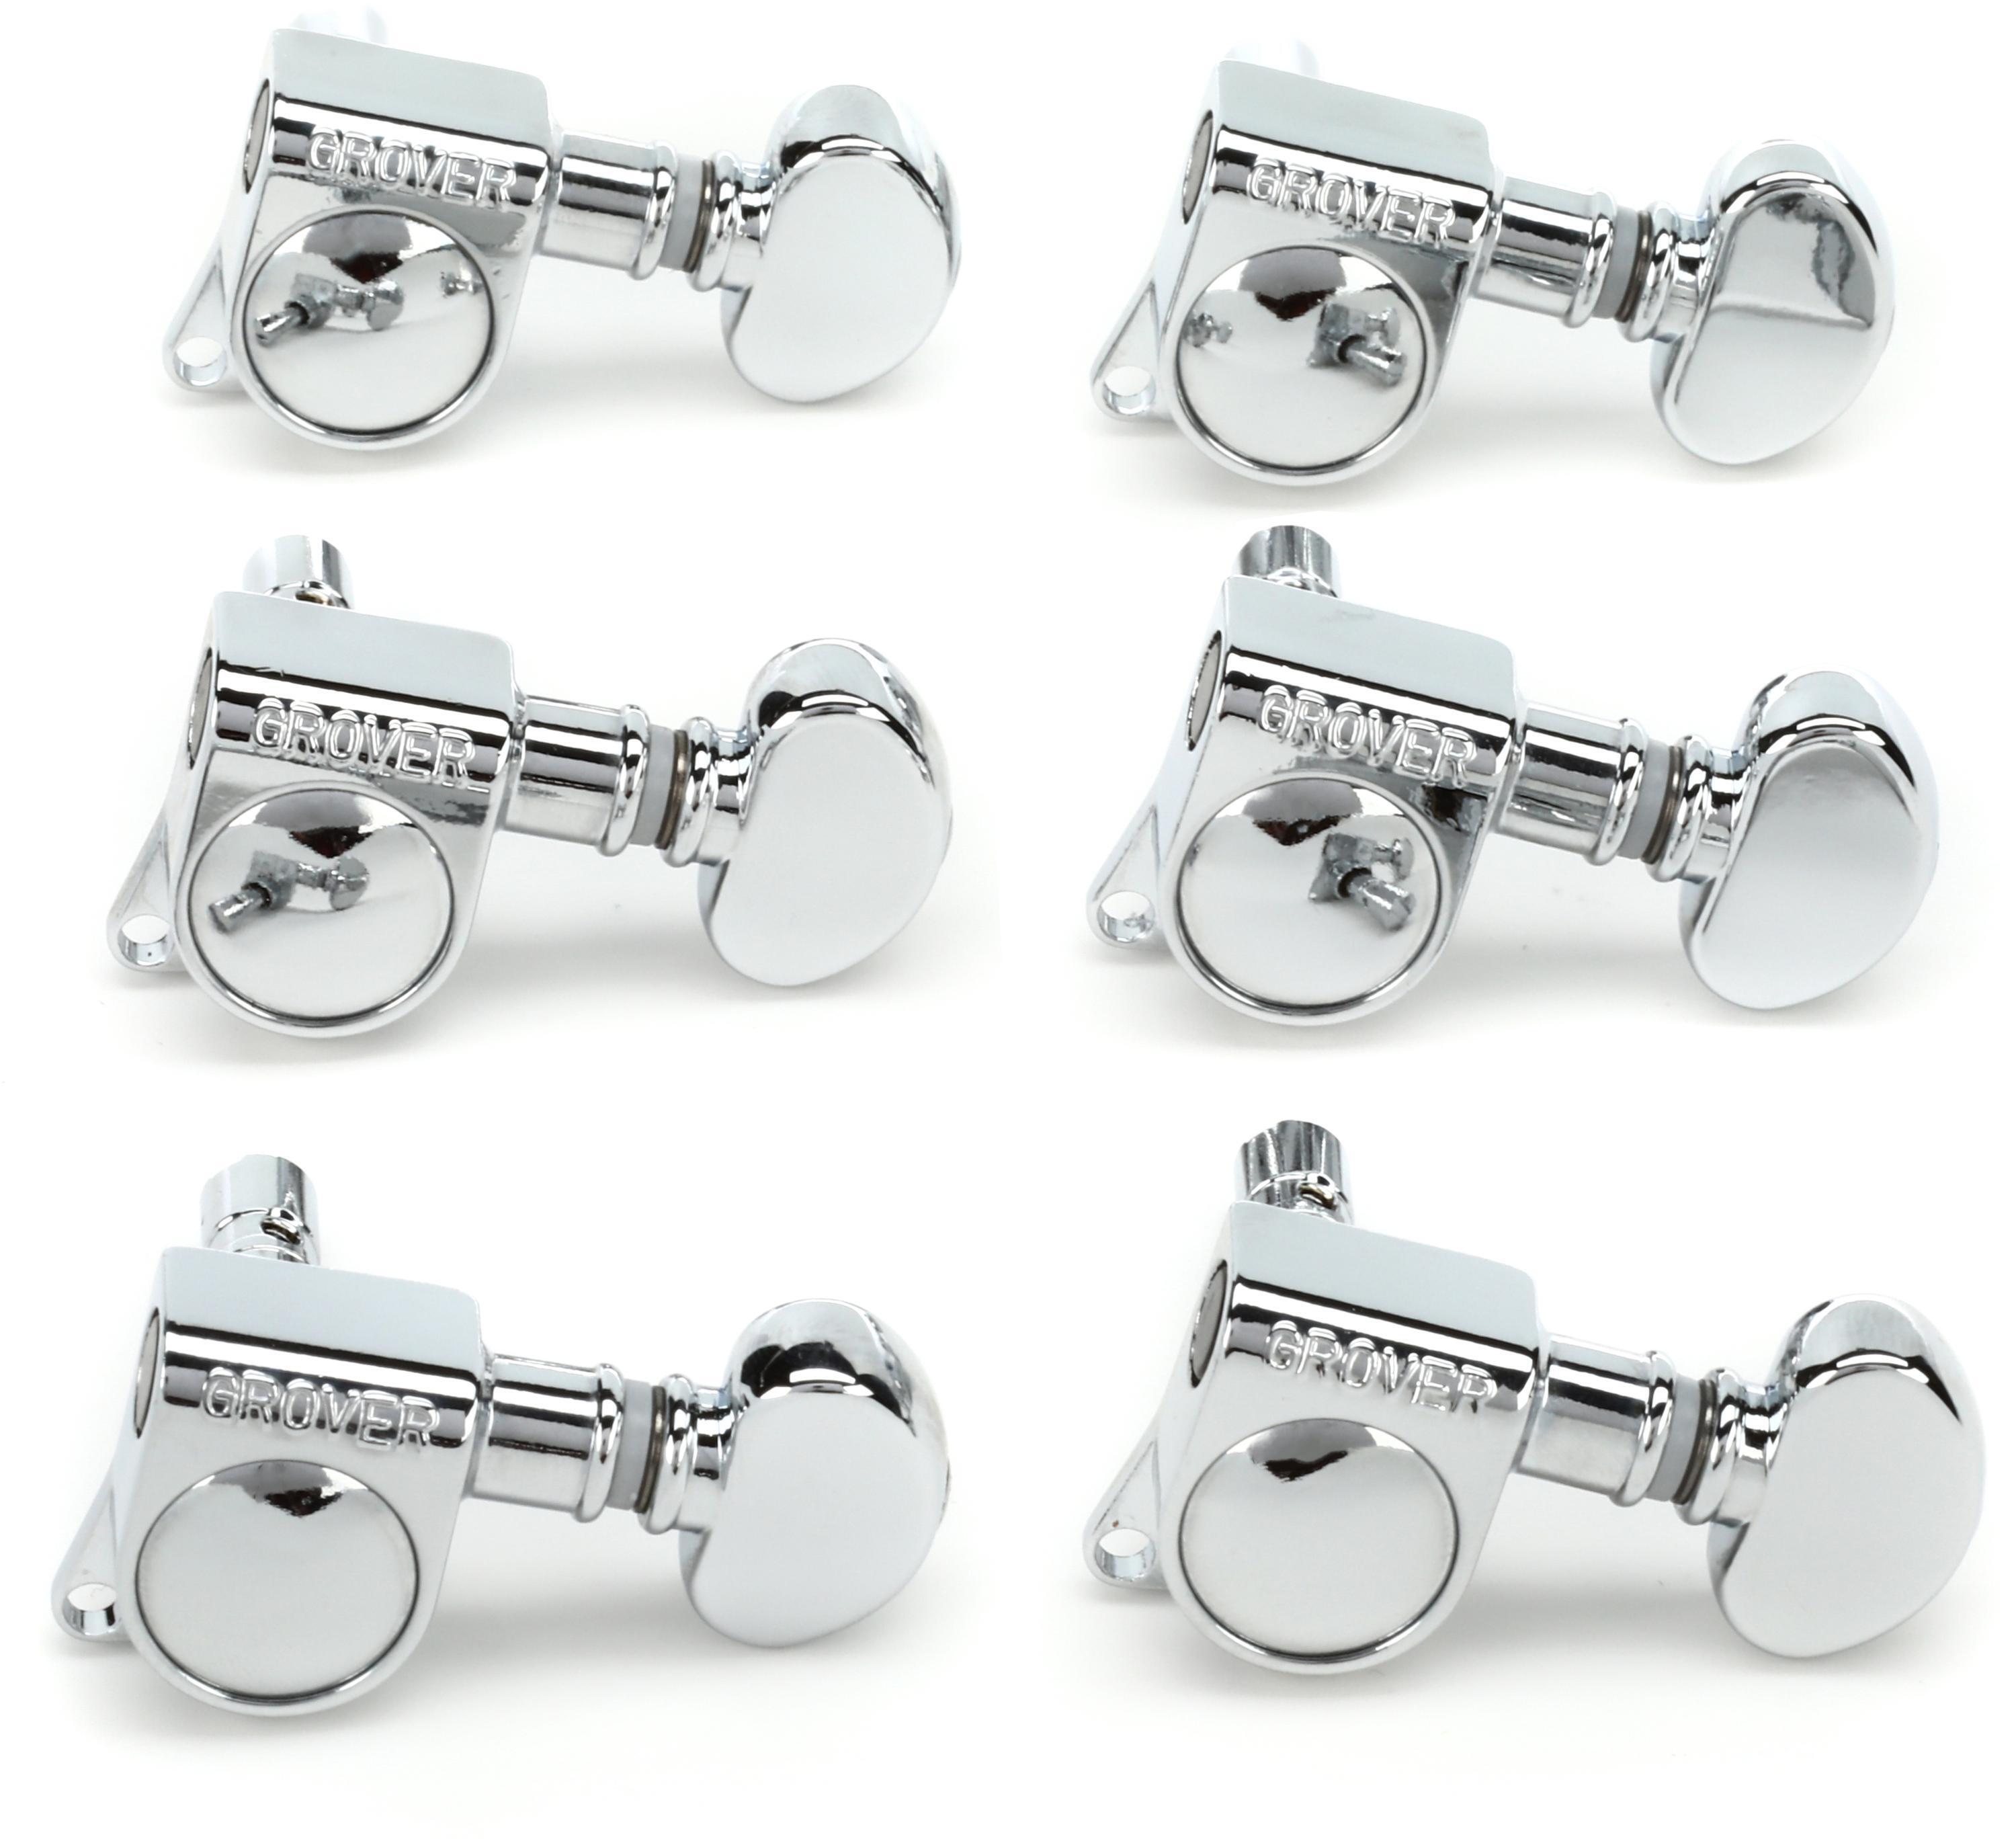 Grover 406c6 Mid Size Locking Rotomatics Tuning Machine Set 6 In Line Chrome Sweetwater